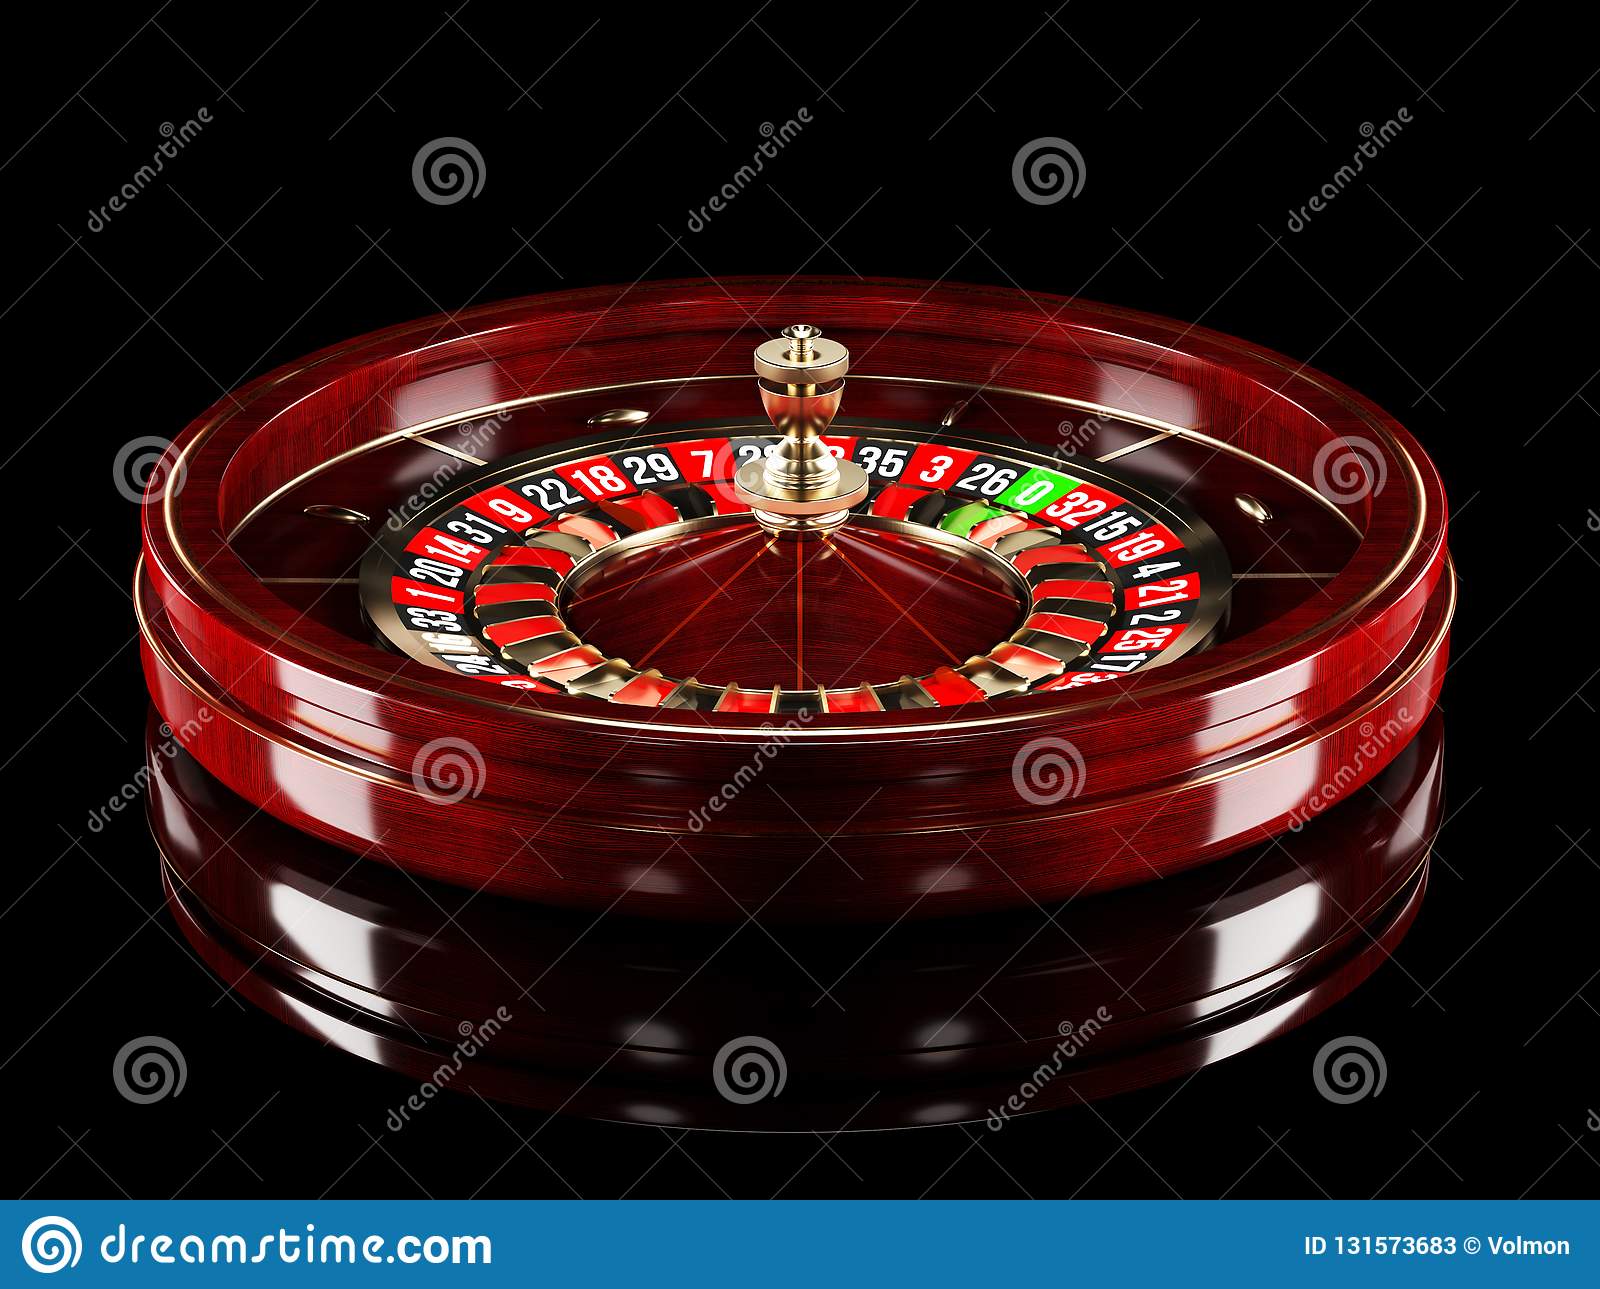 Online casinos you can trust